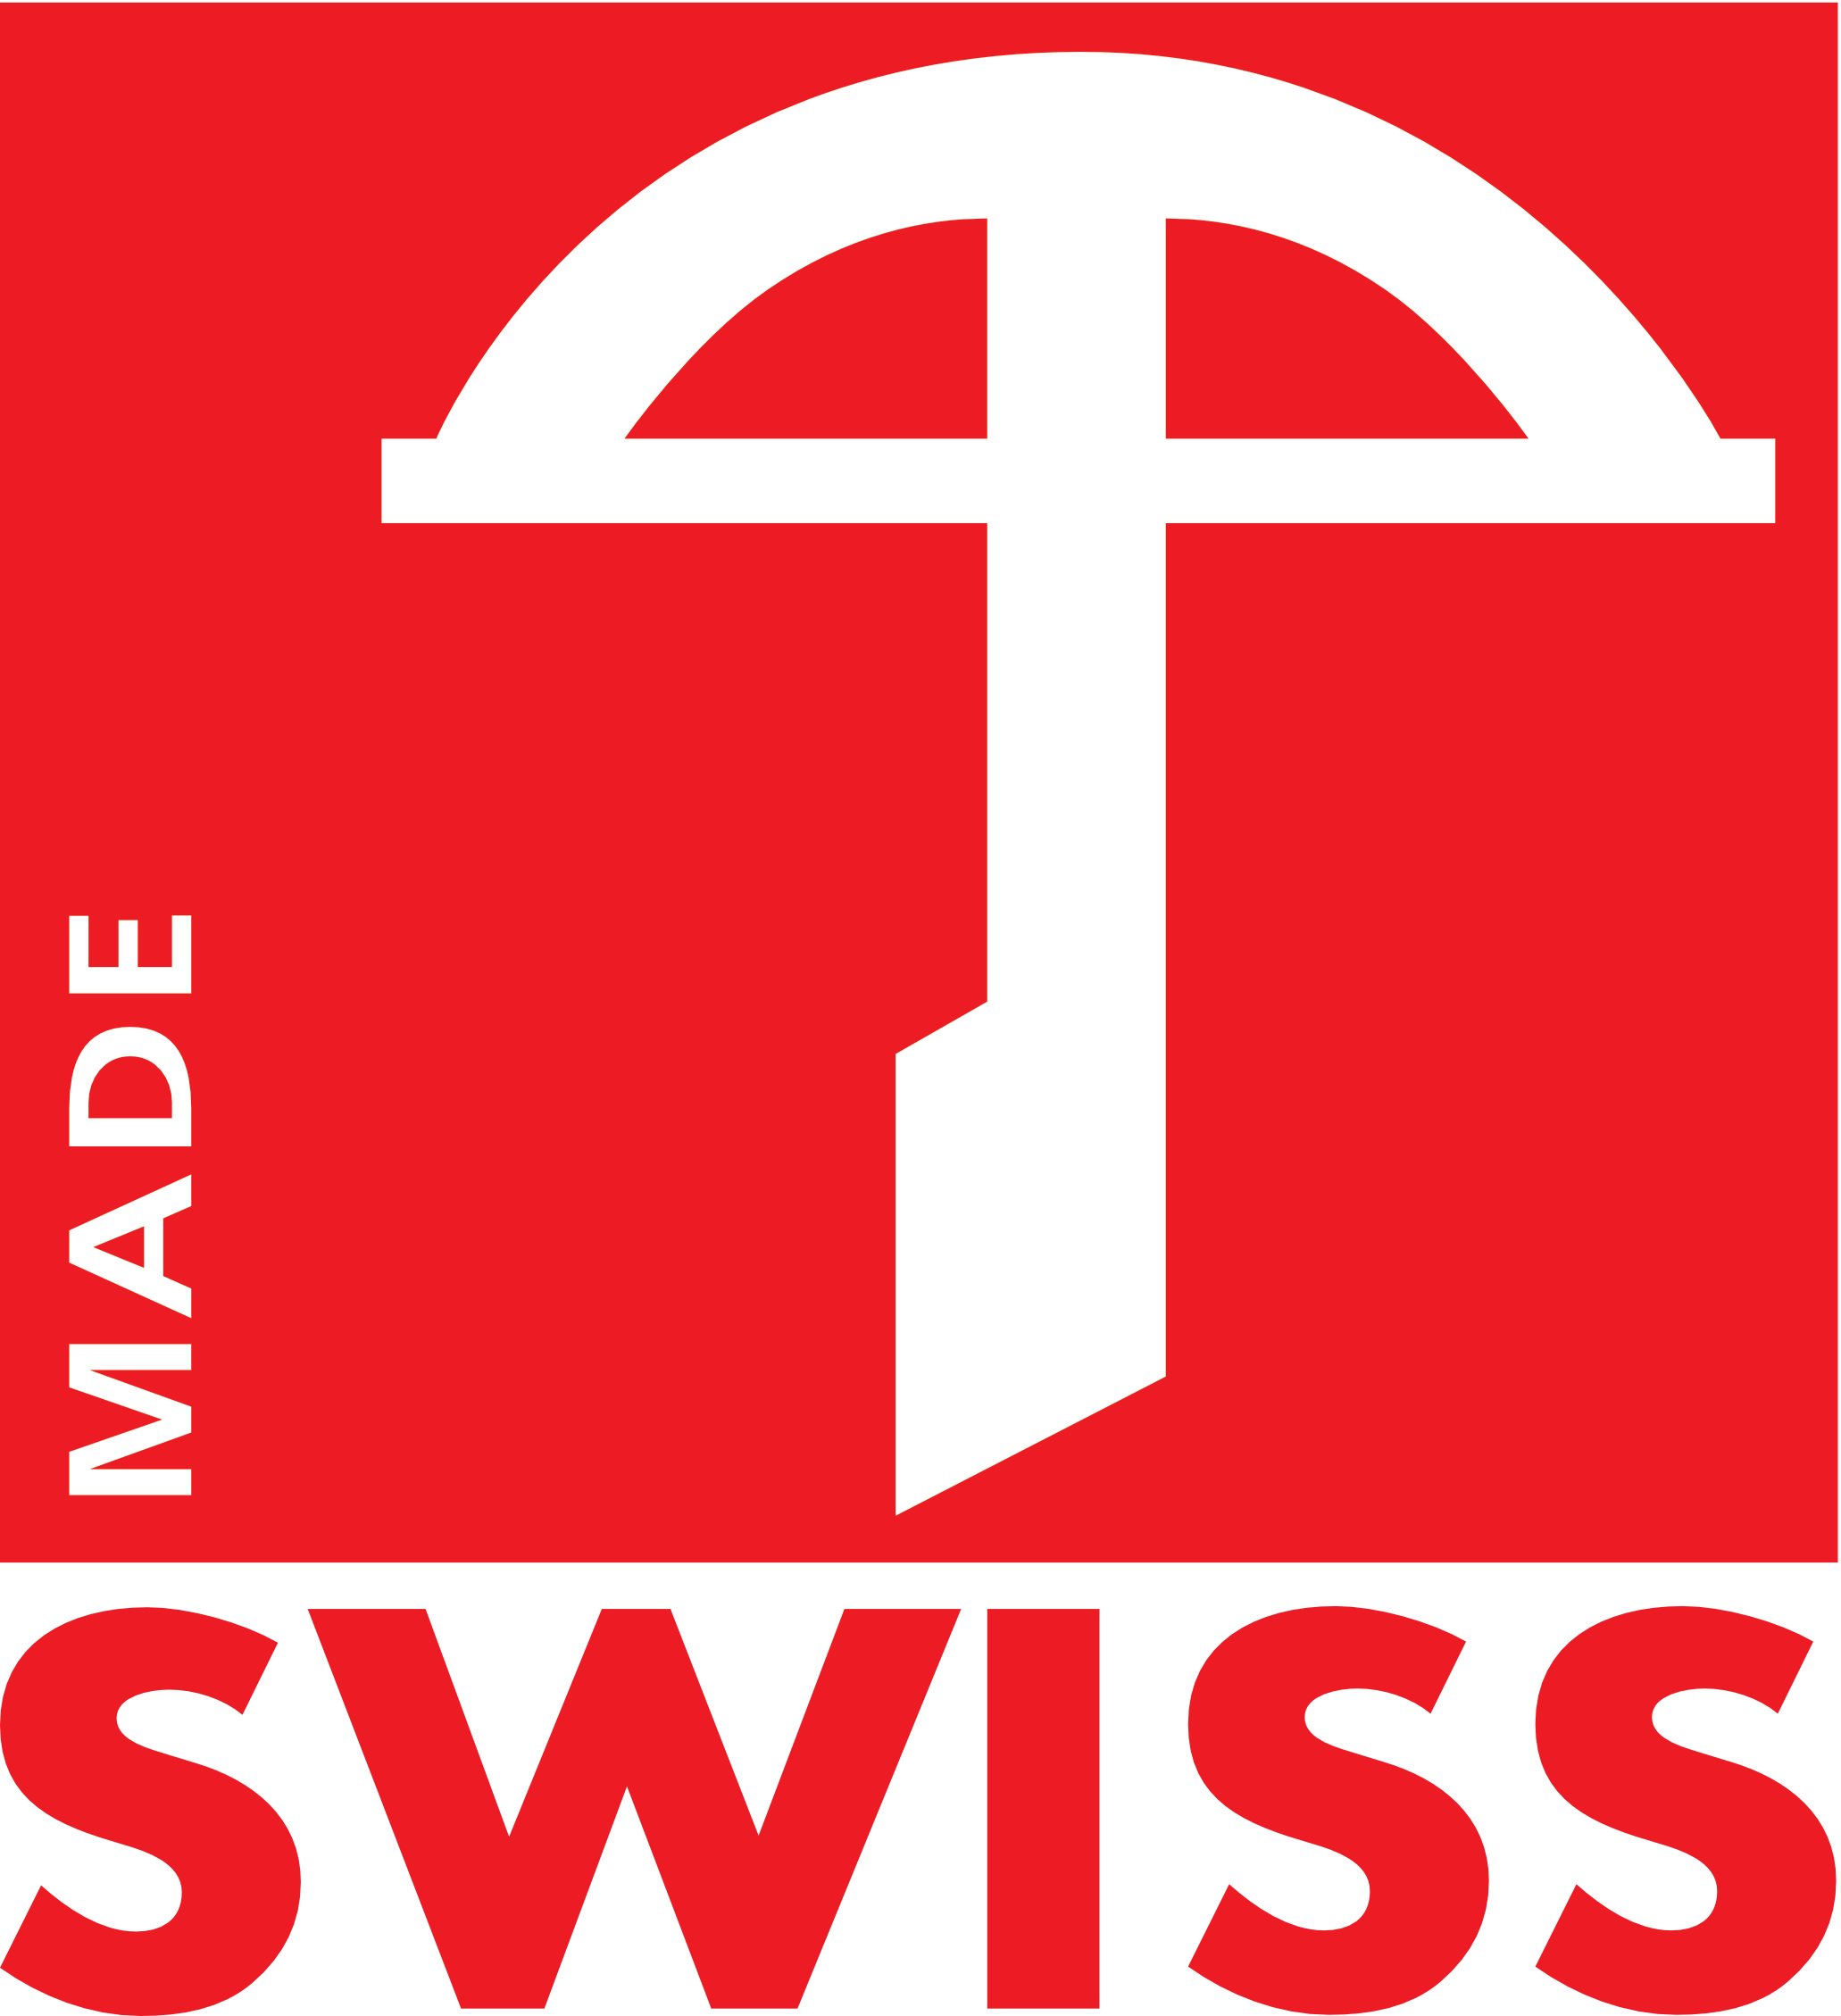 image-11671376-logo_swiss_label_png-c20ad.png